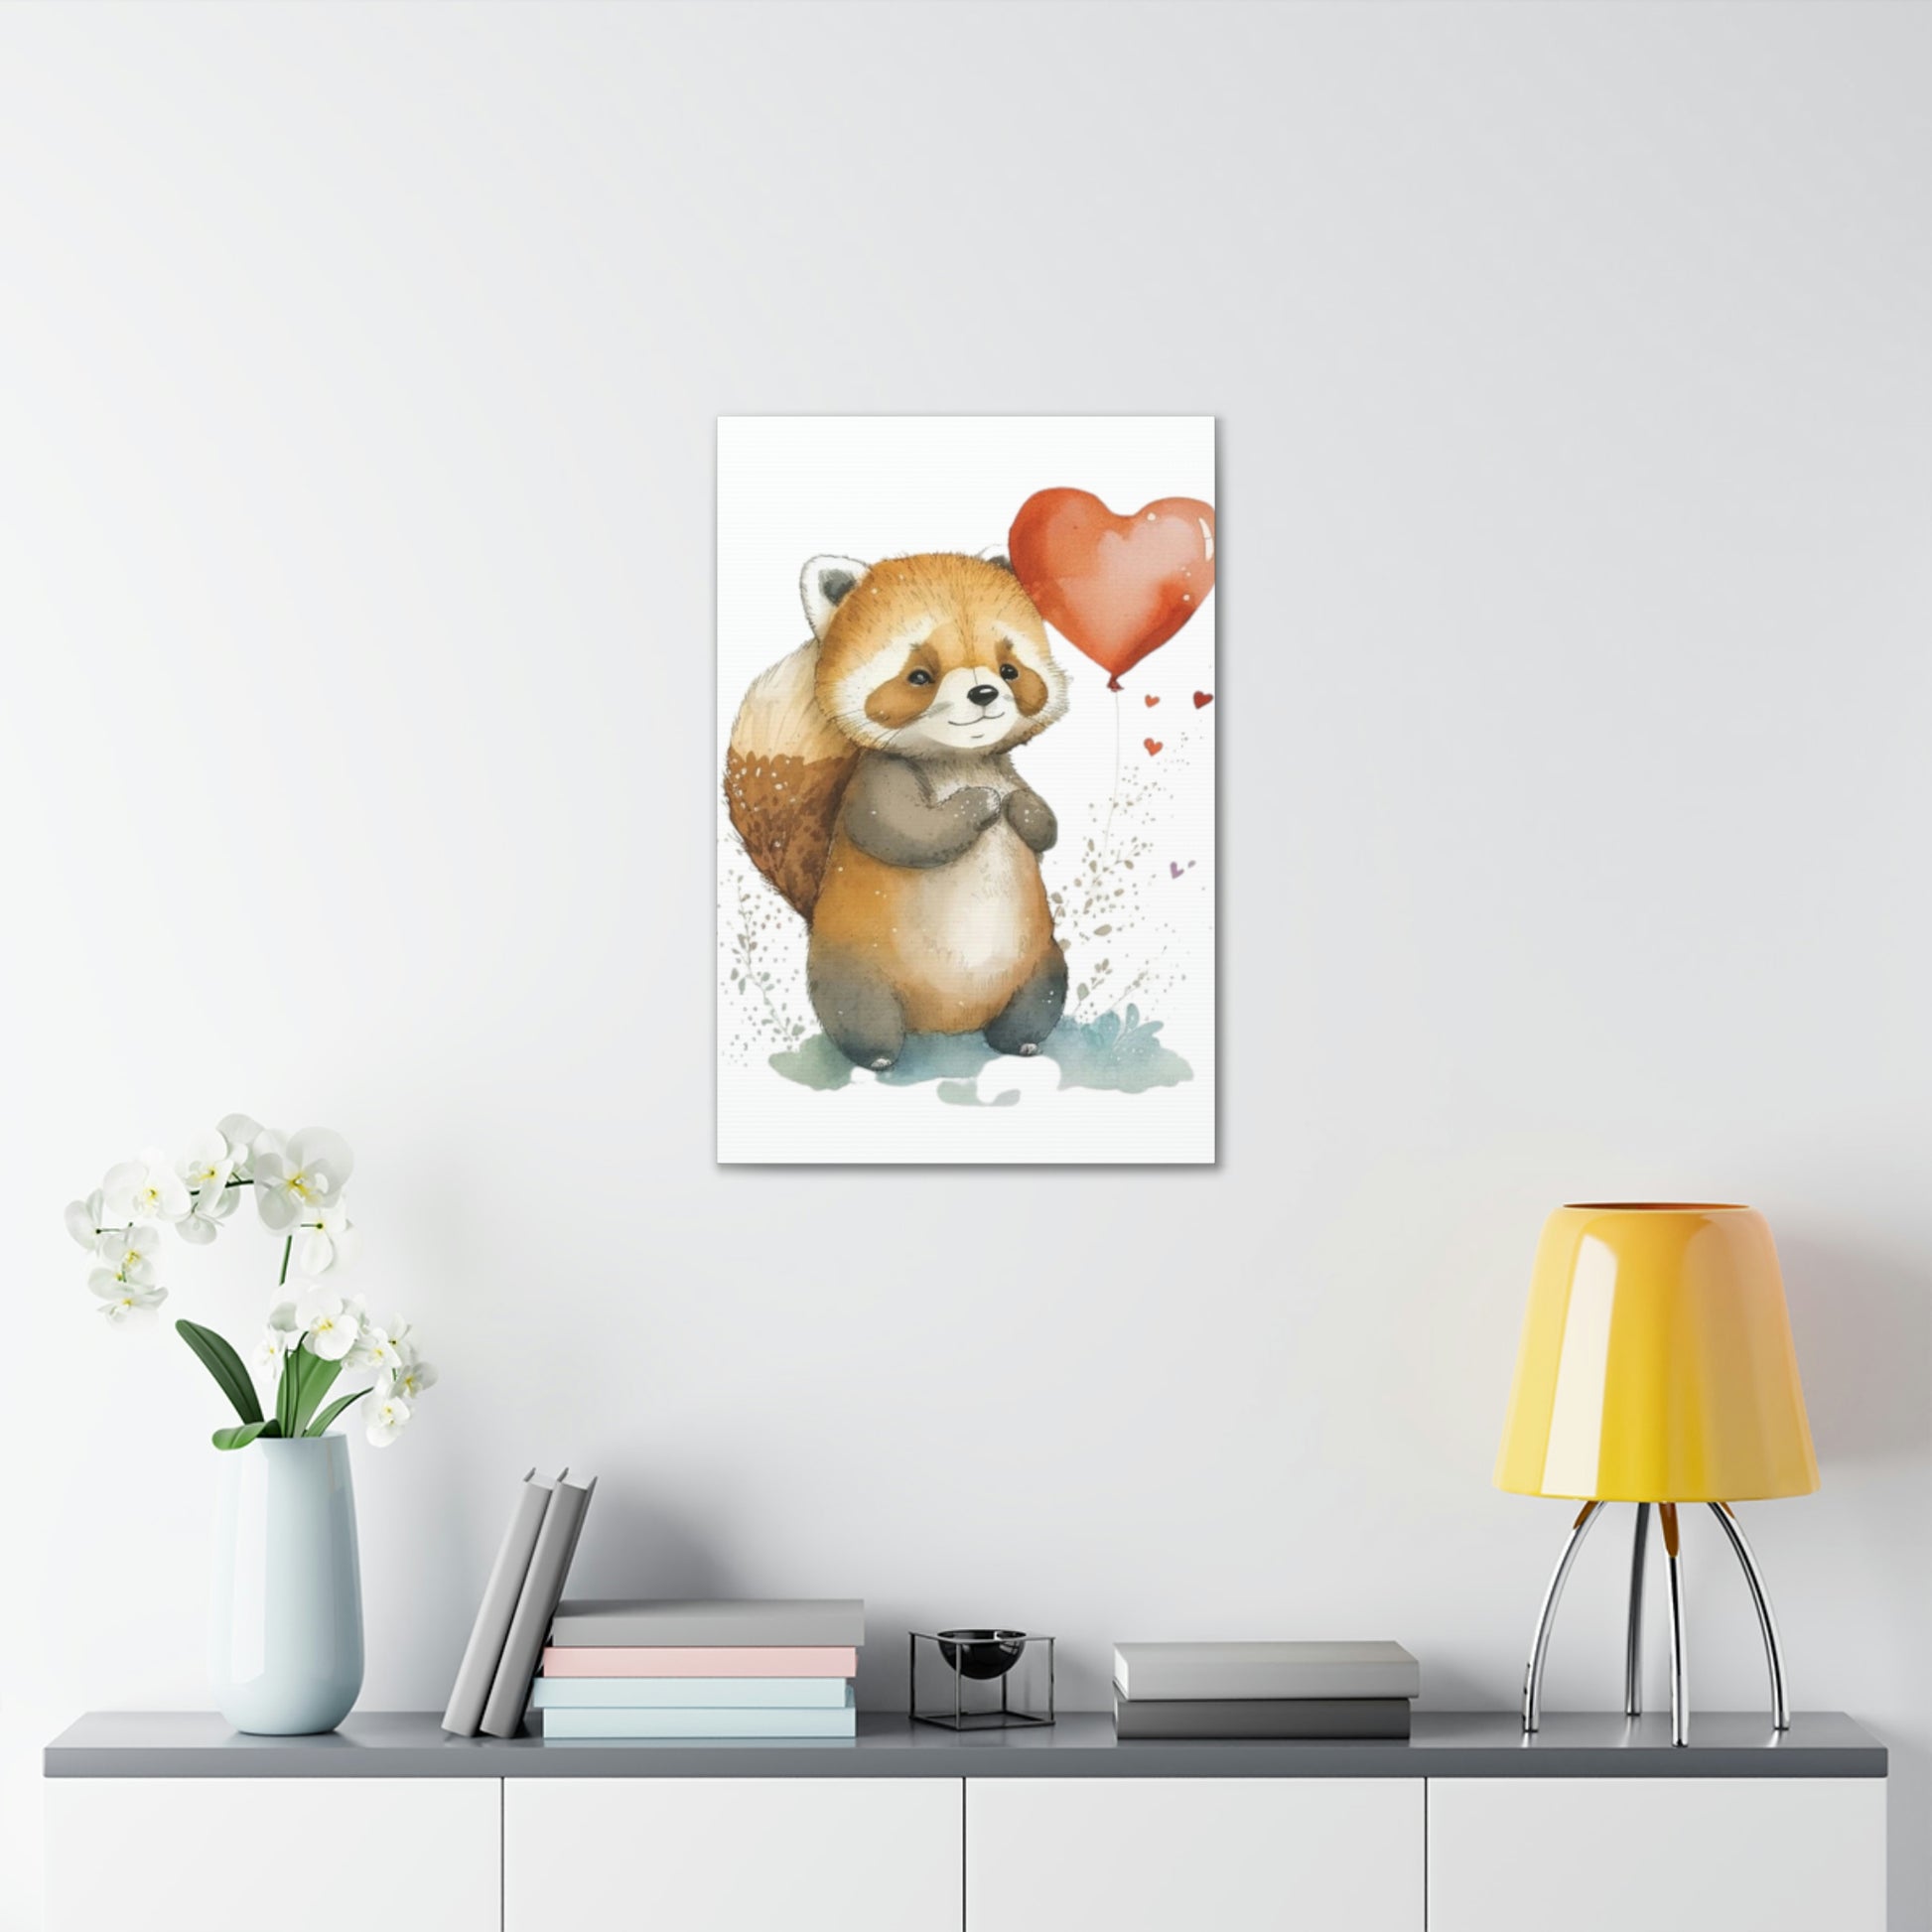 "Balloon Buddy" Wall Art - Weave Got Gifts - Unique Gifts You Won’t Find Anywhere Else!